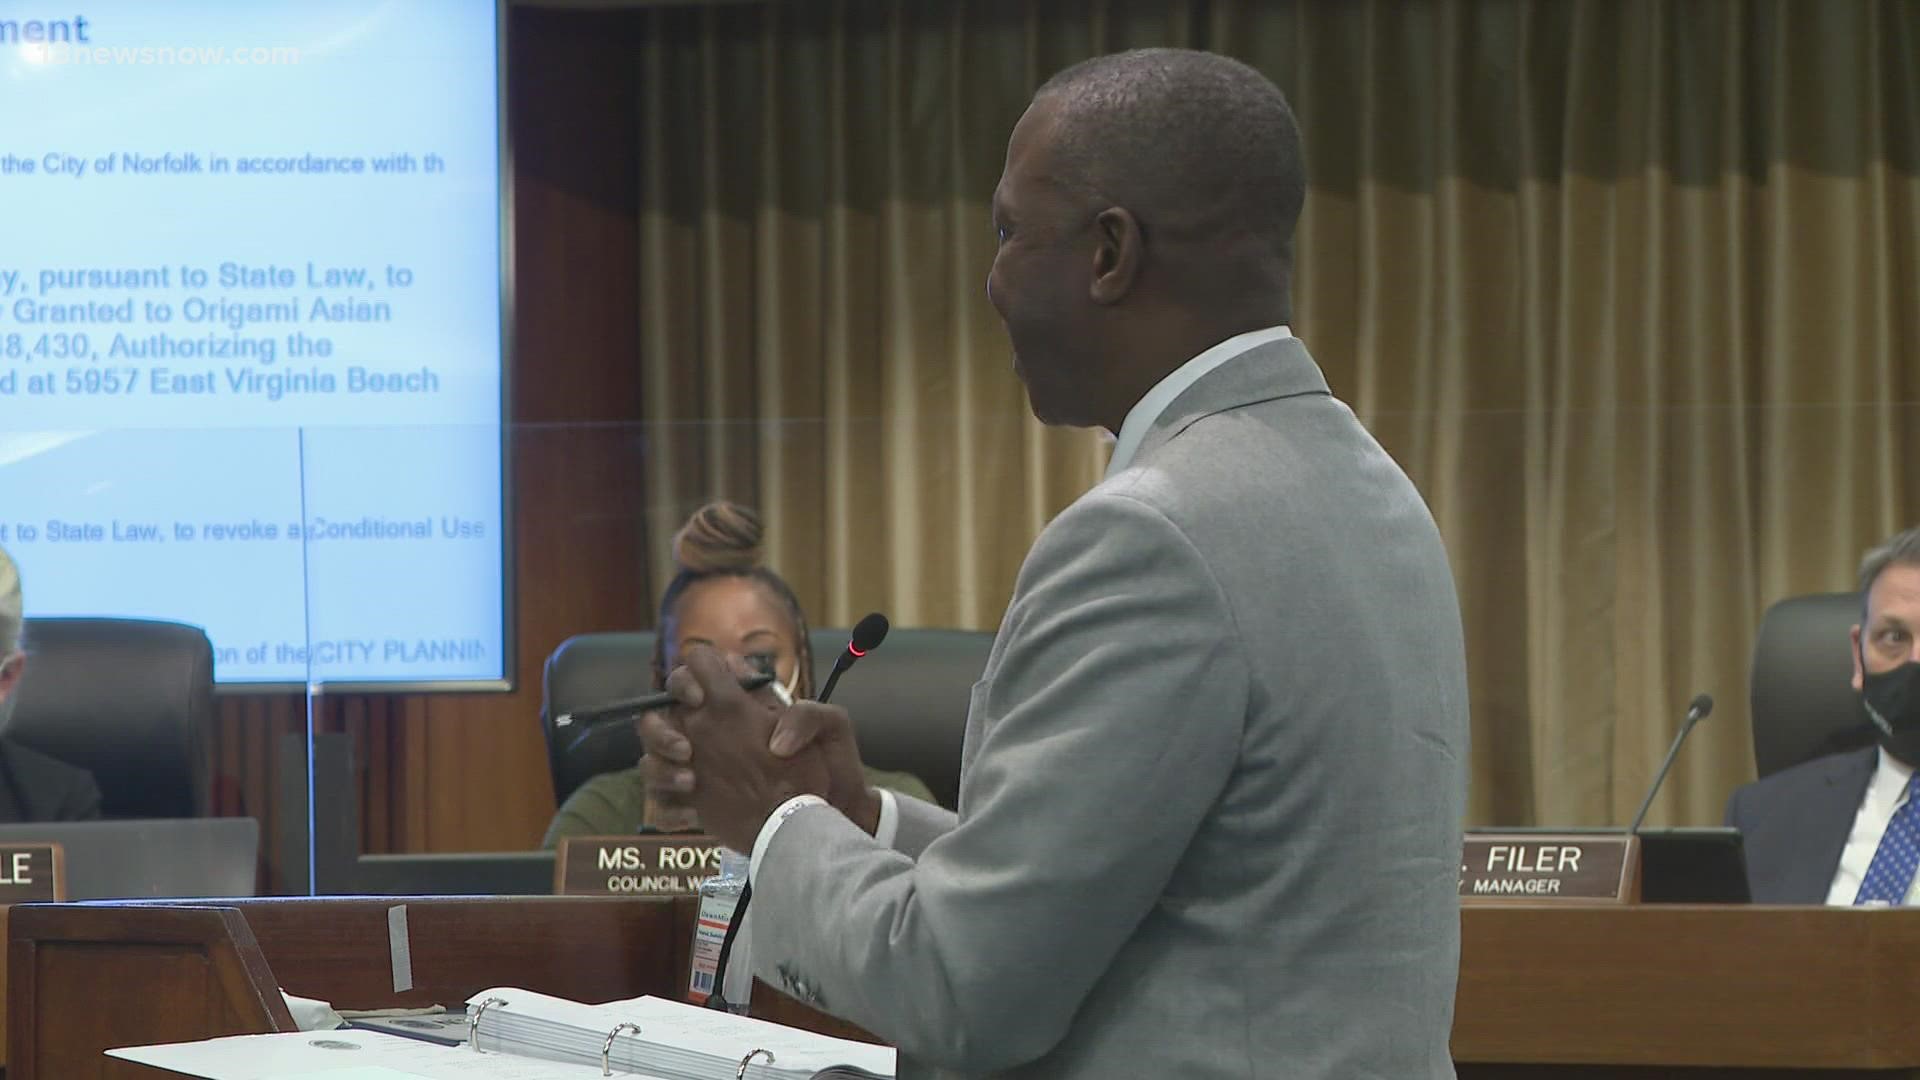 Two nightclubs in the city sparked debate at Norfolk City Council Tuesday night.